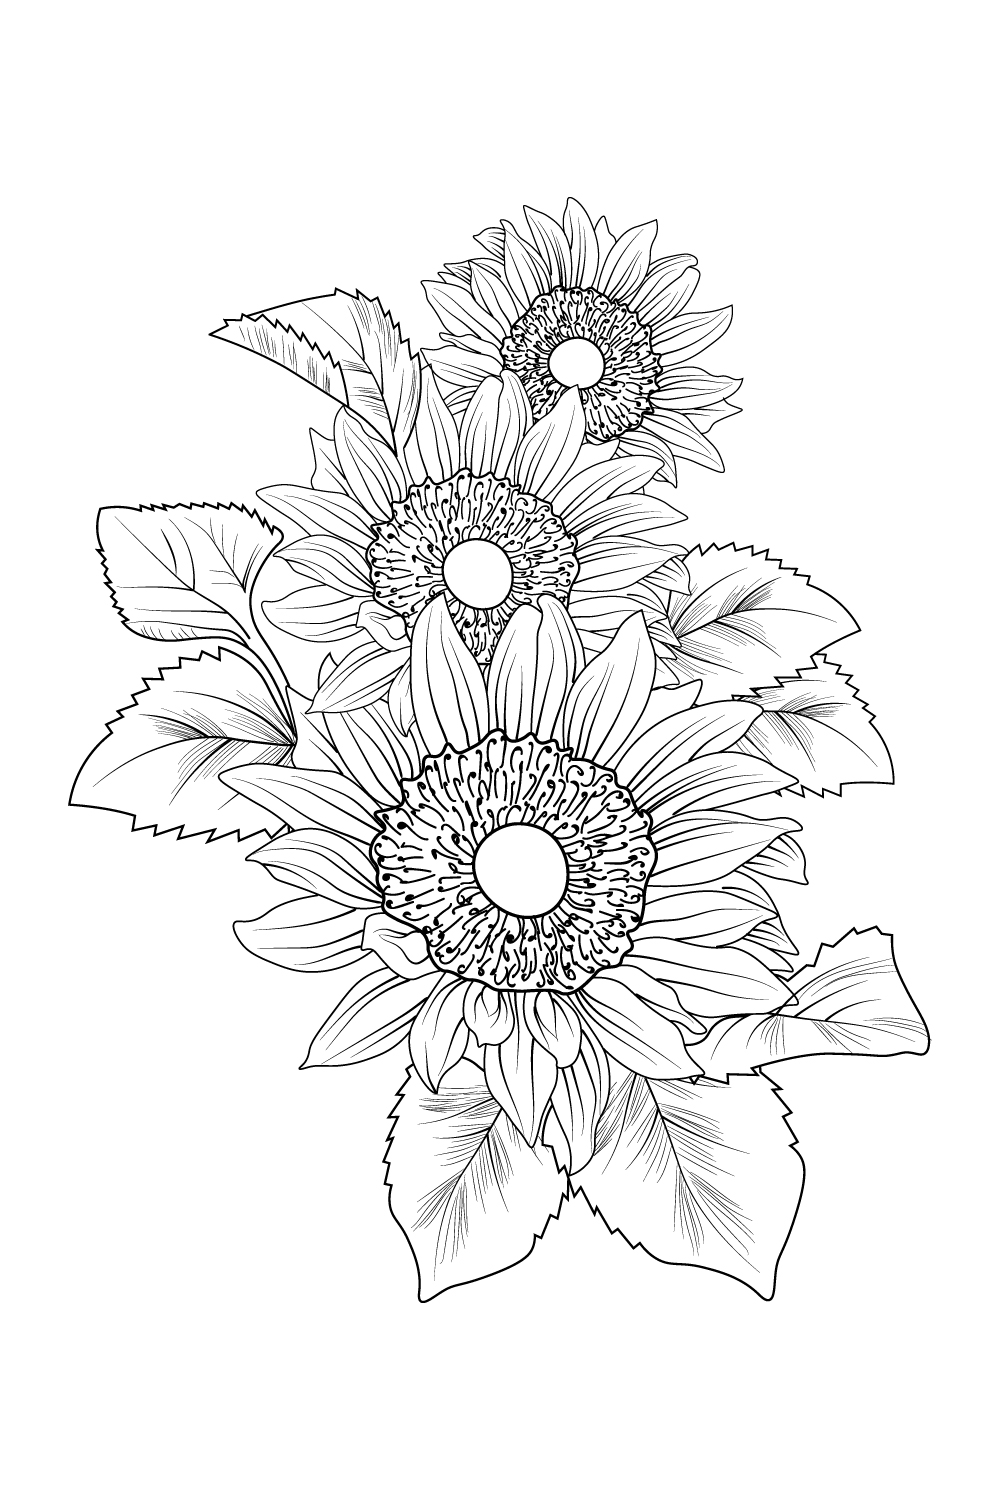 62 Cheerful Sunflower Tattoos with Meaning - Our Mindful Life